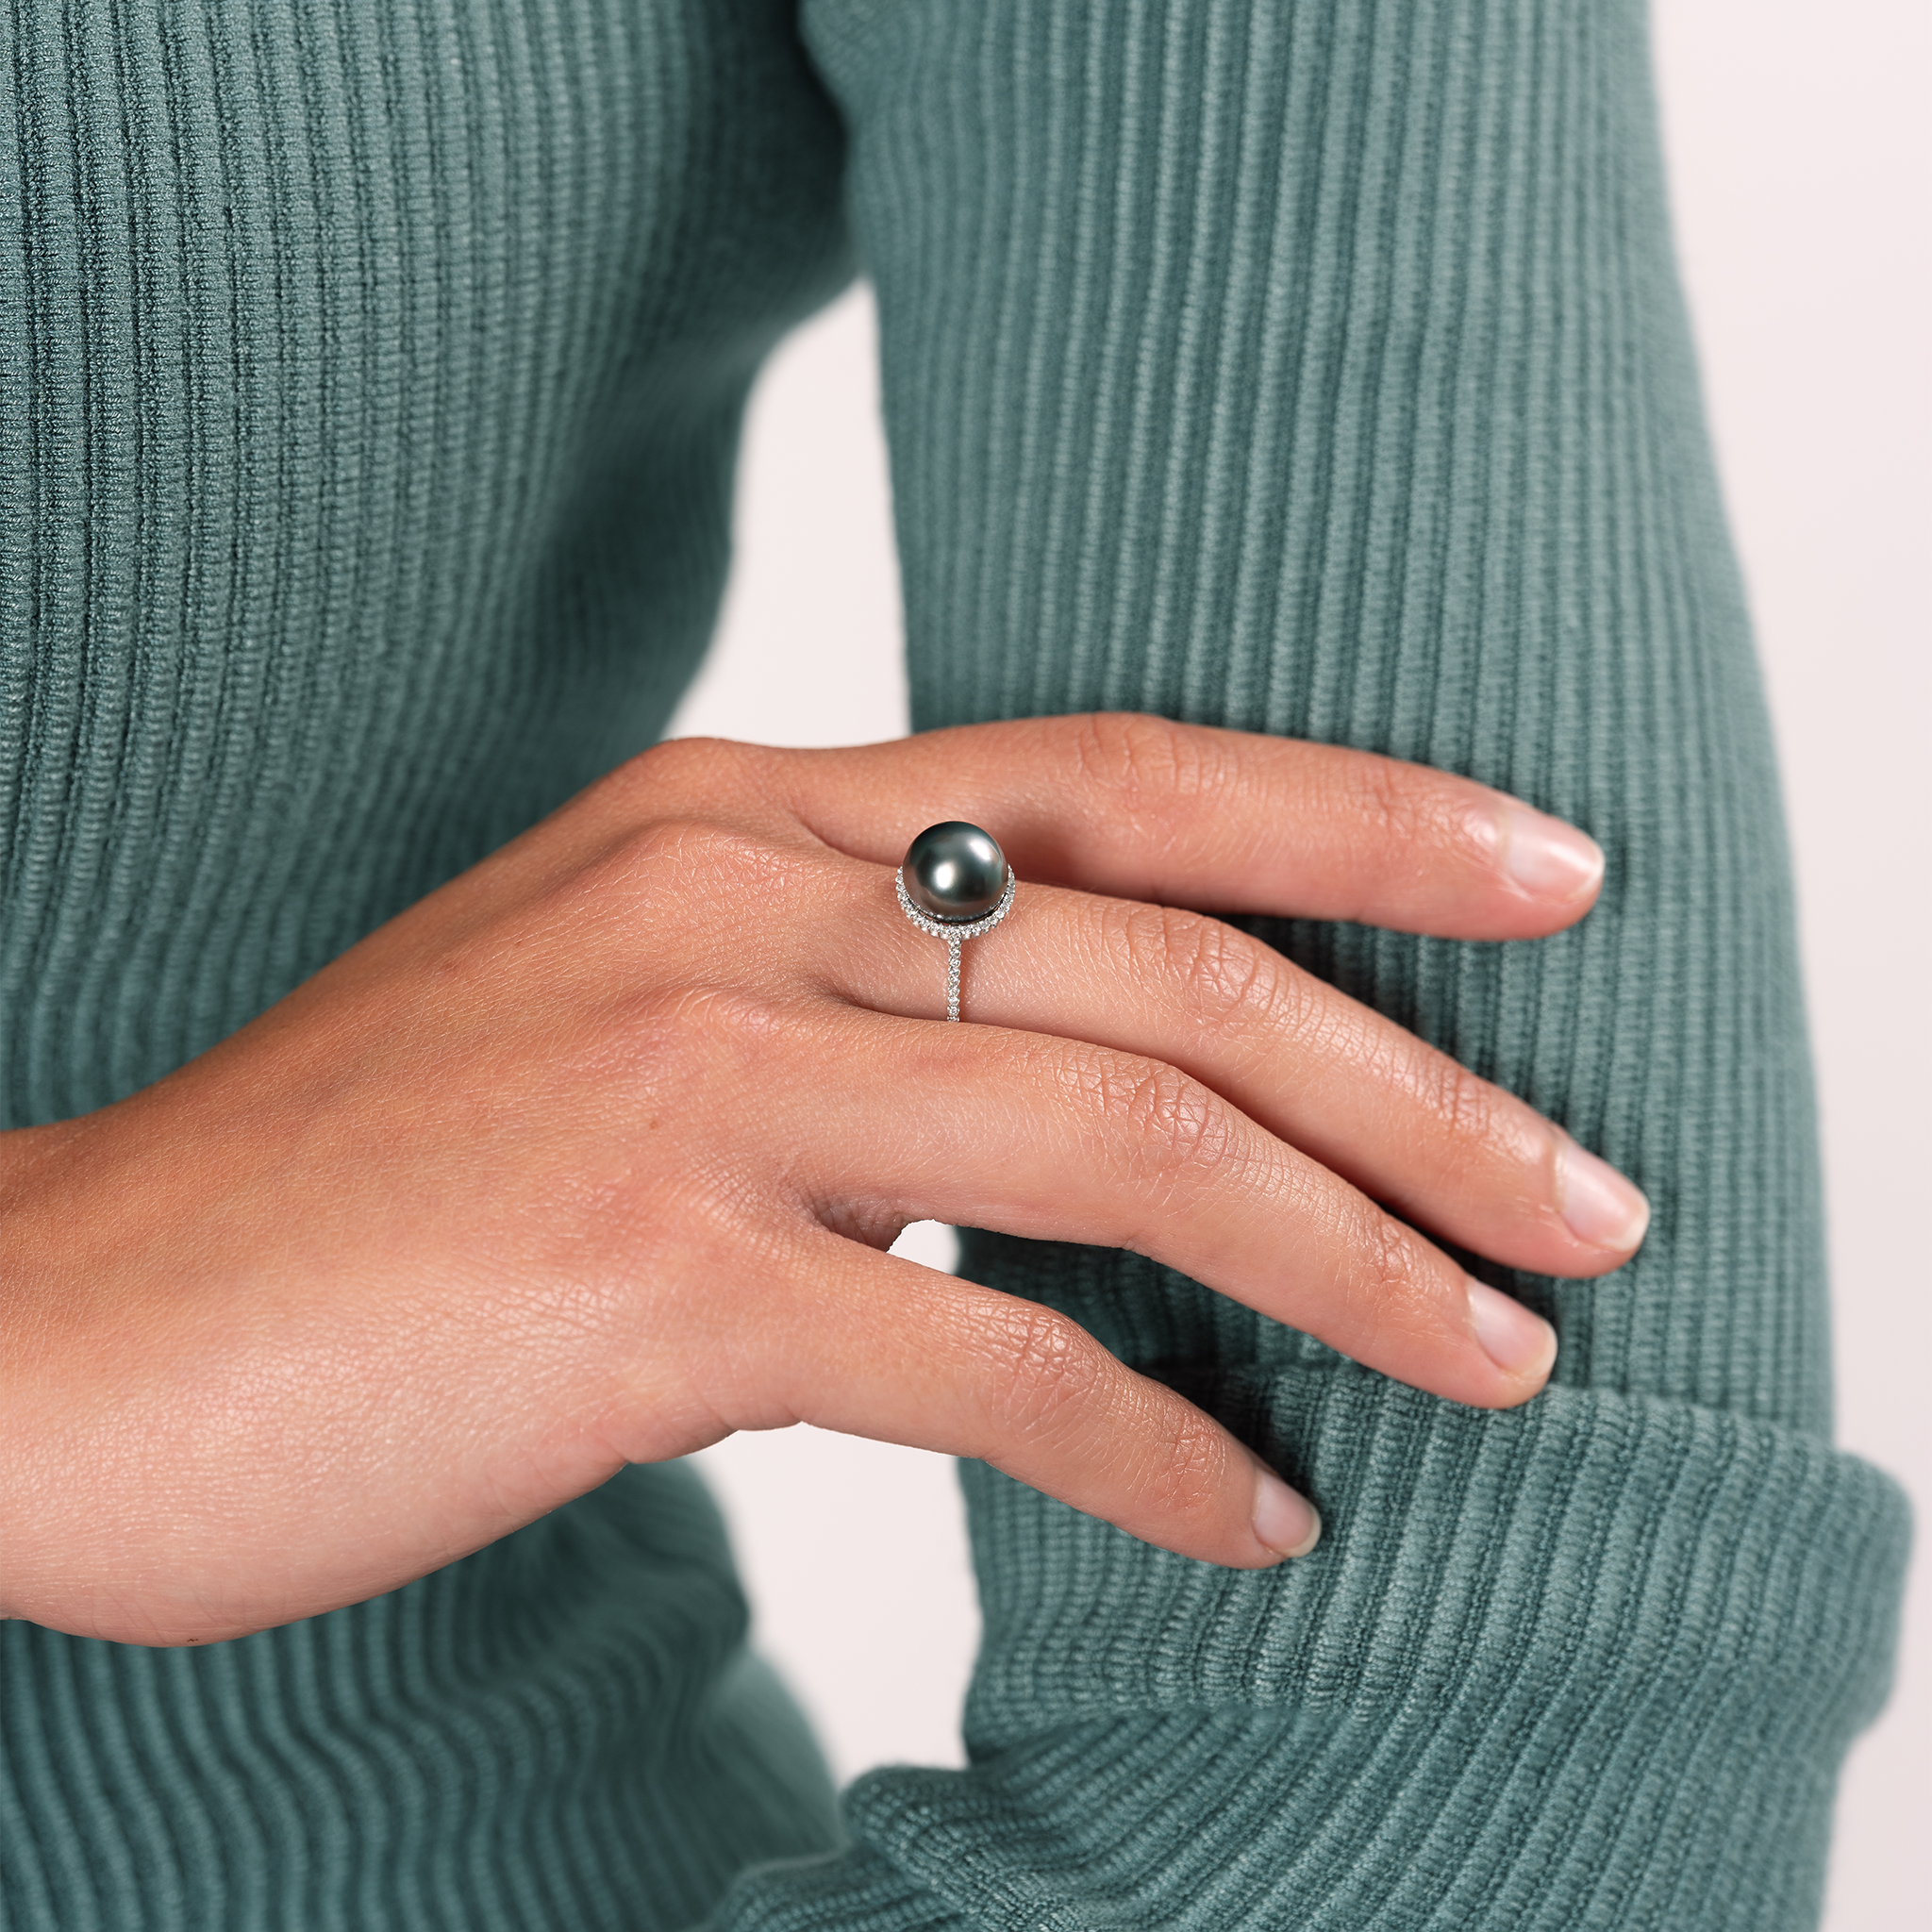 Tahitian Black Pearl Halo Ring in White Gold with Diamonds - 9-10mm